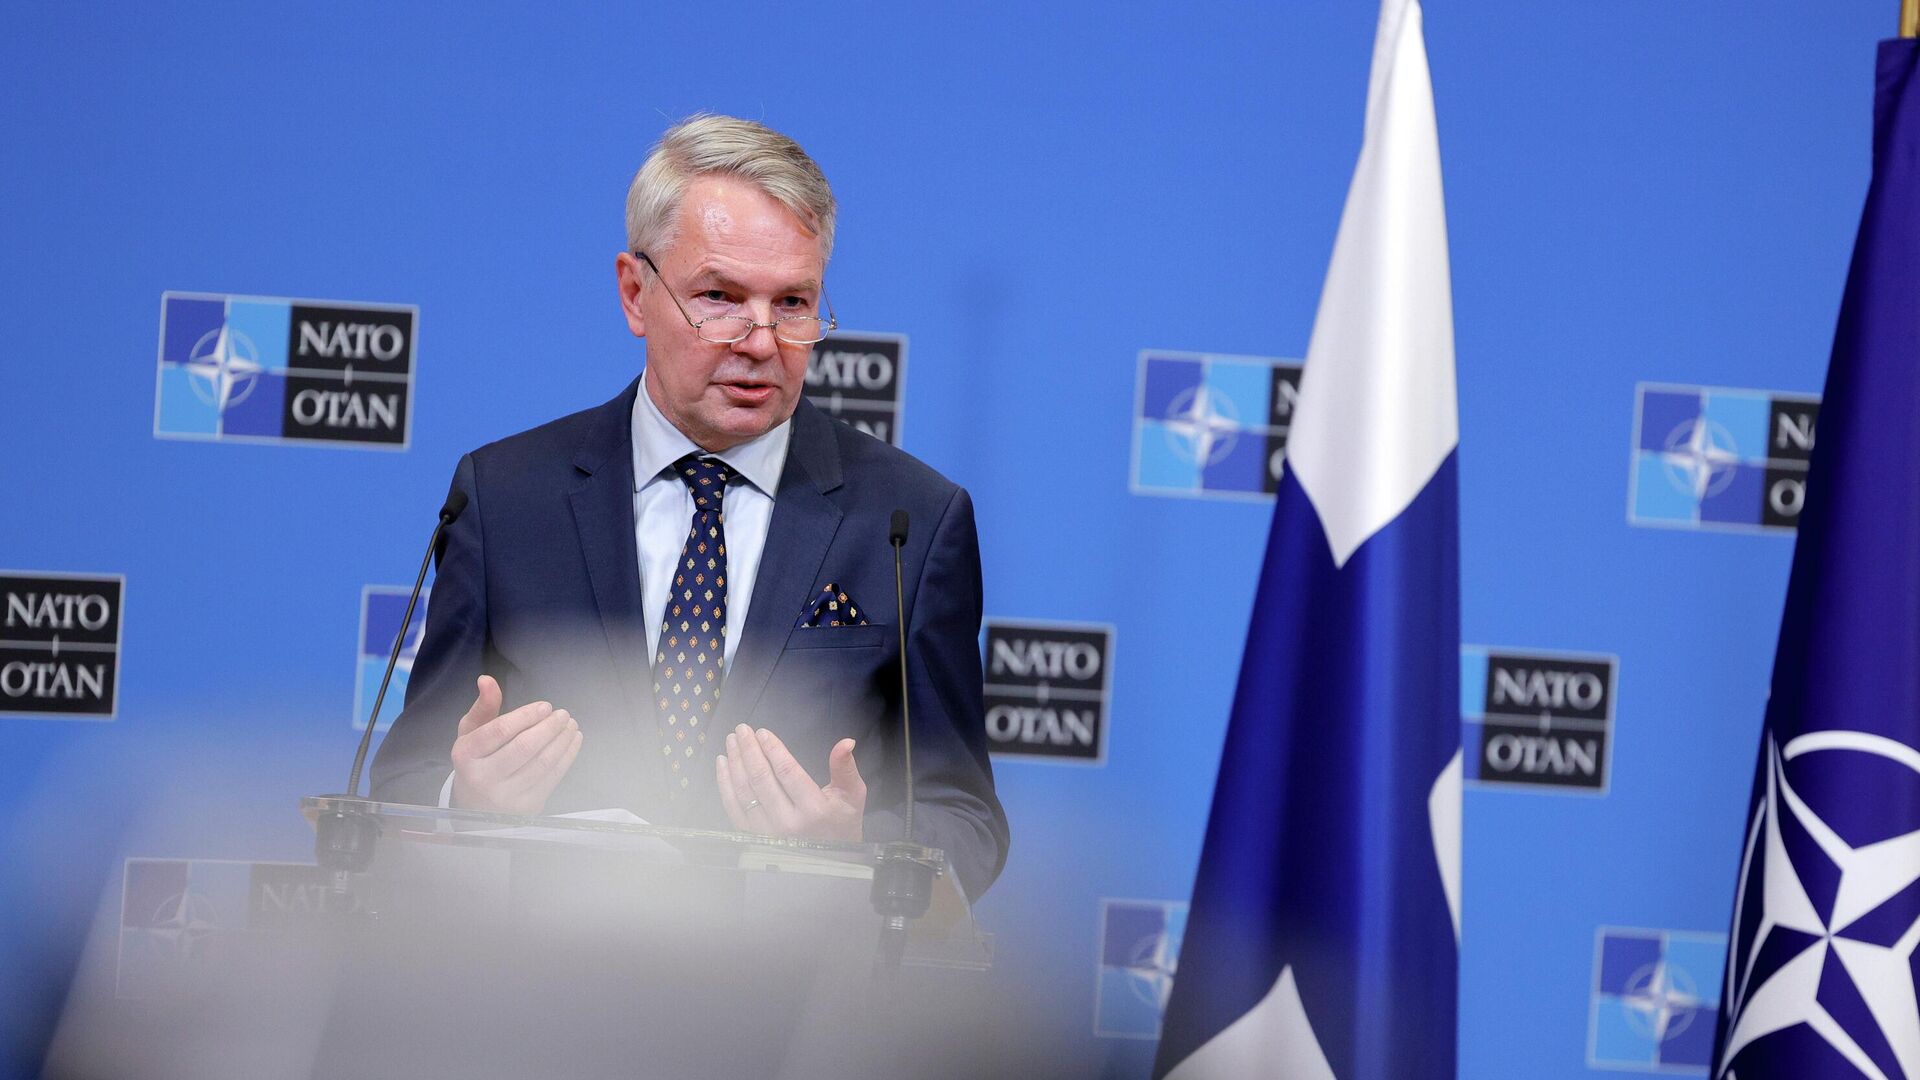 Finland's Foreign Minister Pekka Haavisto speaks during a media conference at NATO headquarters in Brussels, Monday, Jan. 24, 2022. - Sputnik International, 1920, 12.05.2022